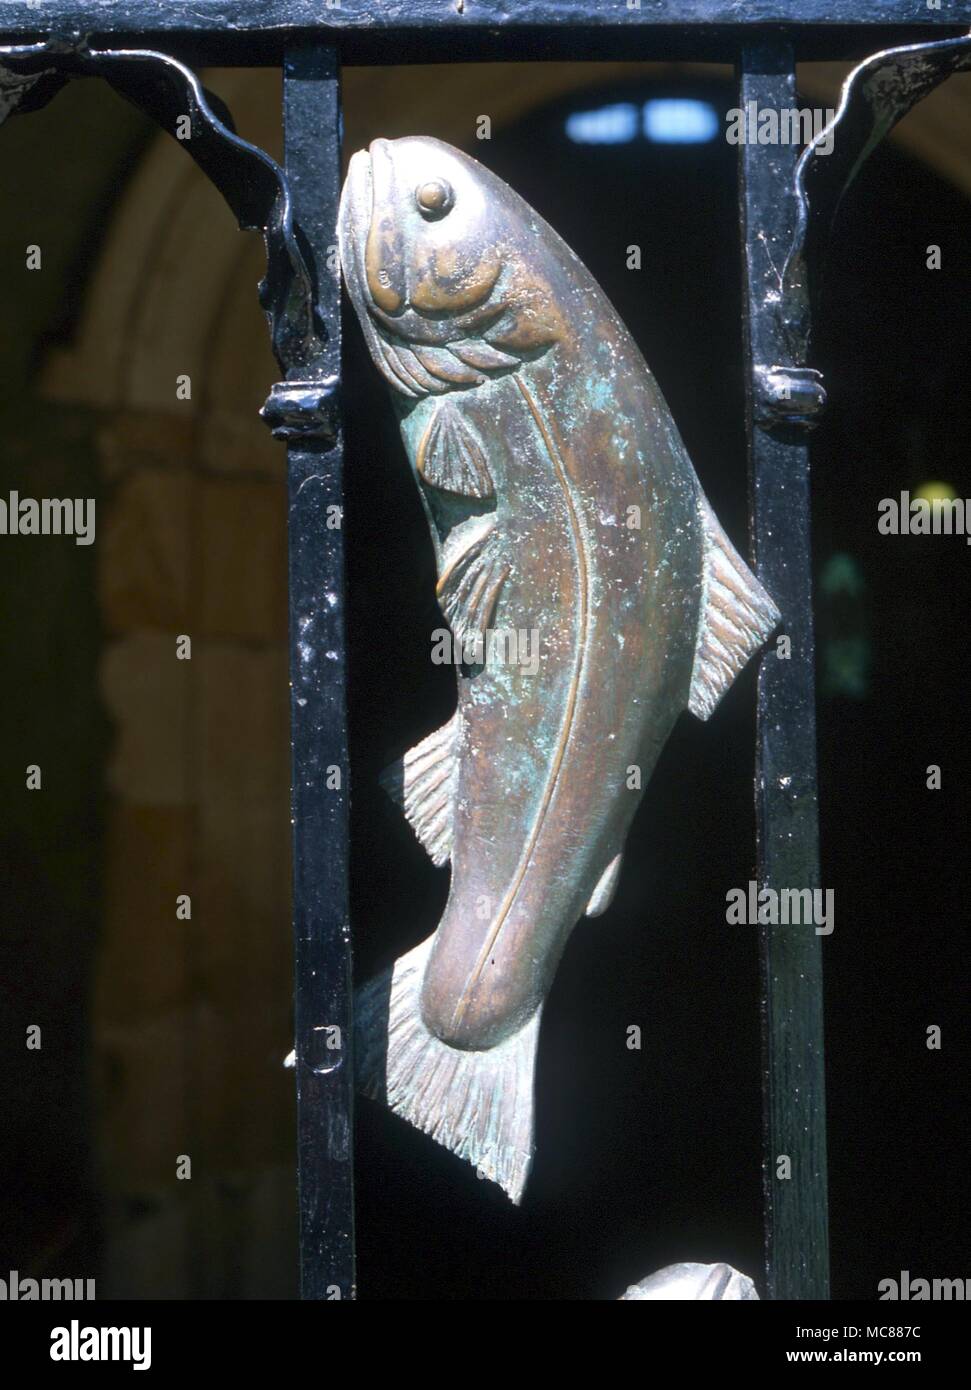 CHRISTIAN Fish from among a group of eight which decorate the metal porch gate of the church of St Michael. The fish is a symbol for Christ Stock Photo